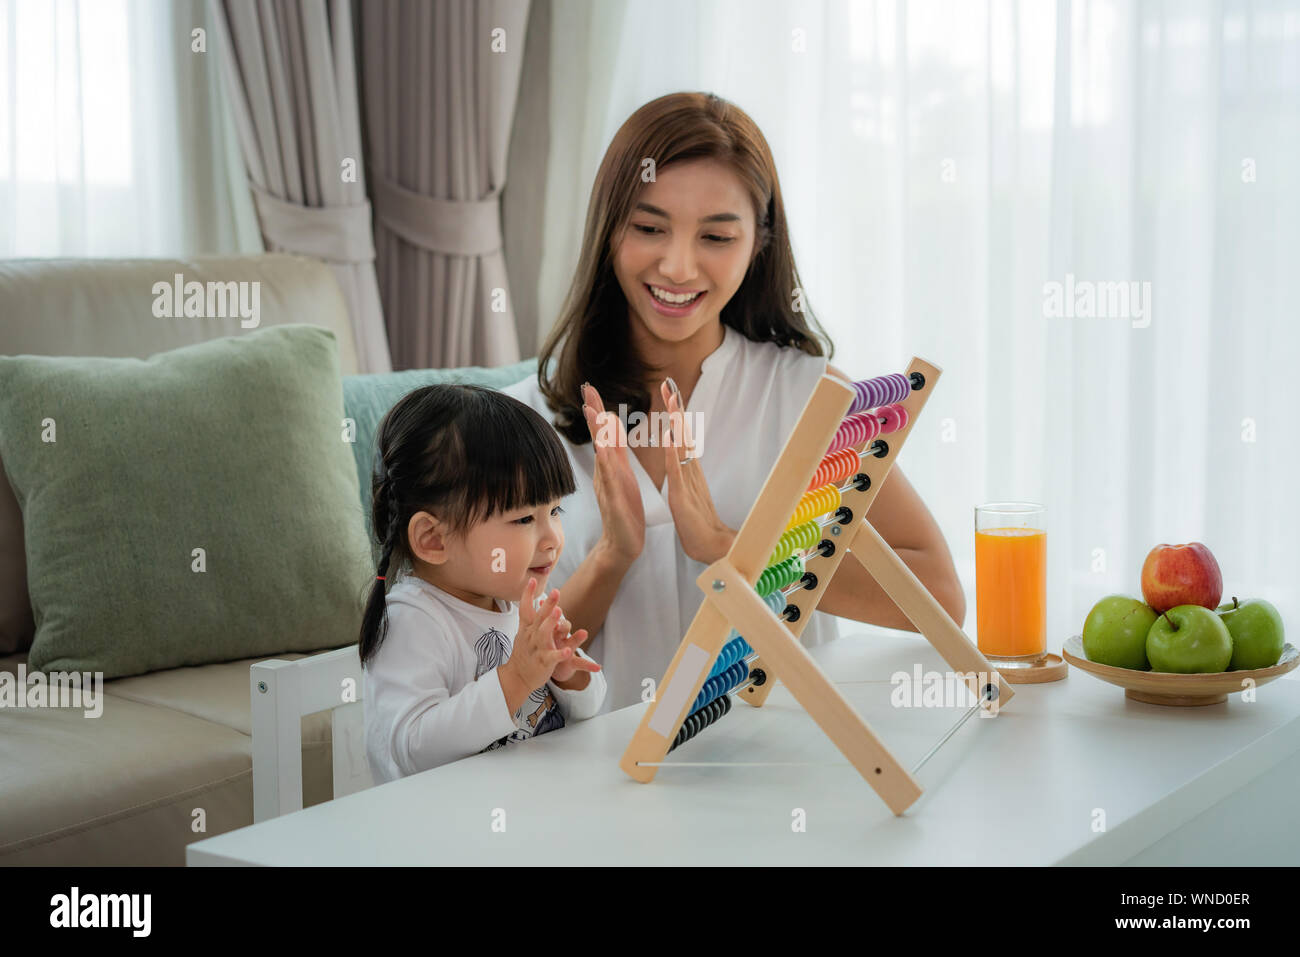 Happy Asian young mother and daughter playing with abacus, early education at home. Stock Photo